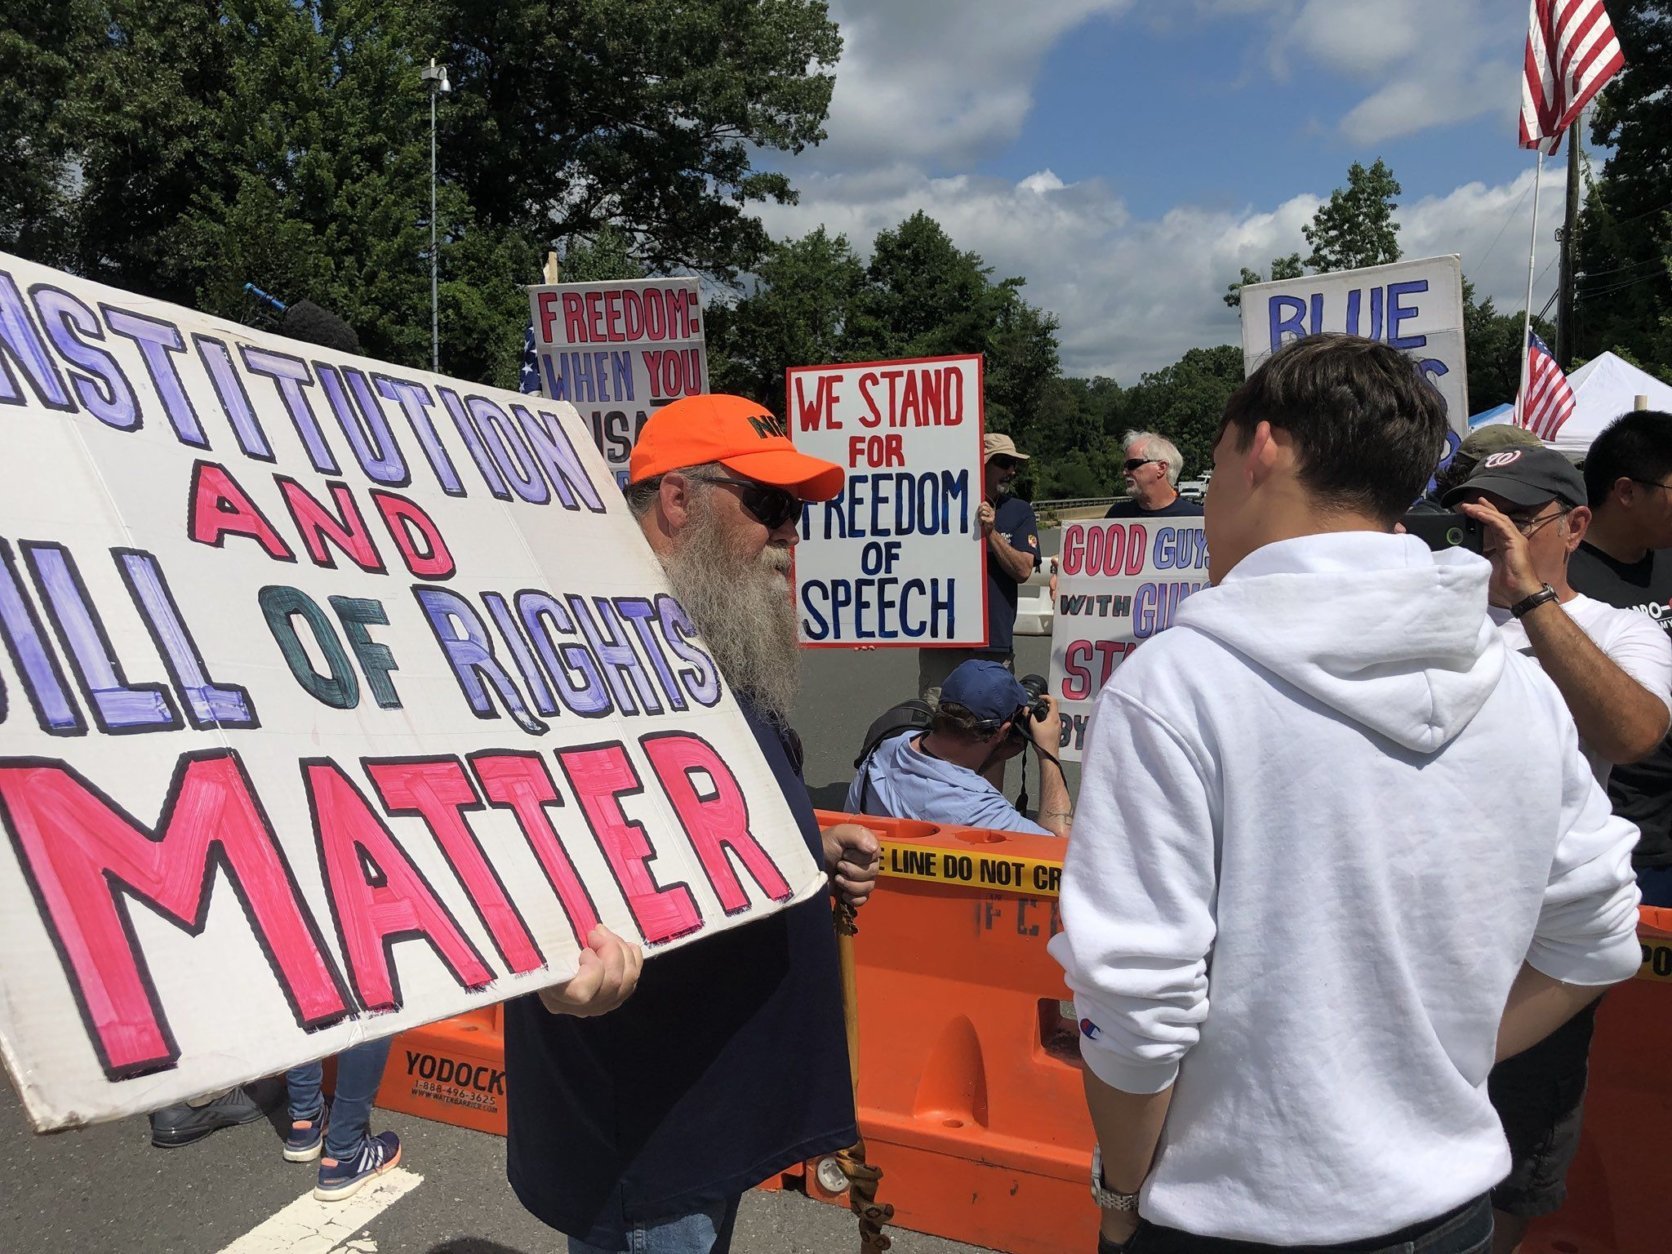 Pro-gun groups stood apart from the main rally on Waples Mill Road. (WTOP/Melissa Howell)